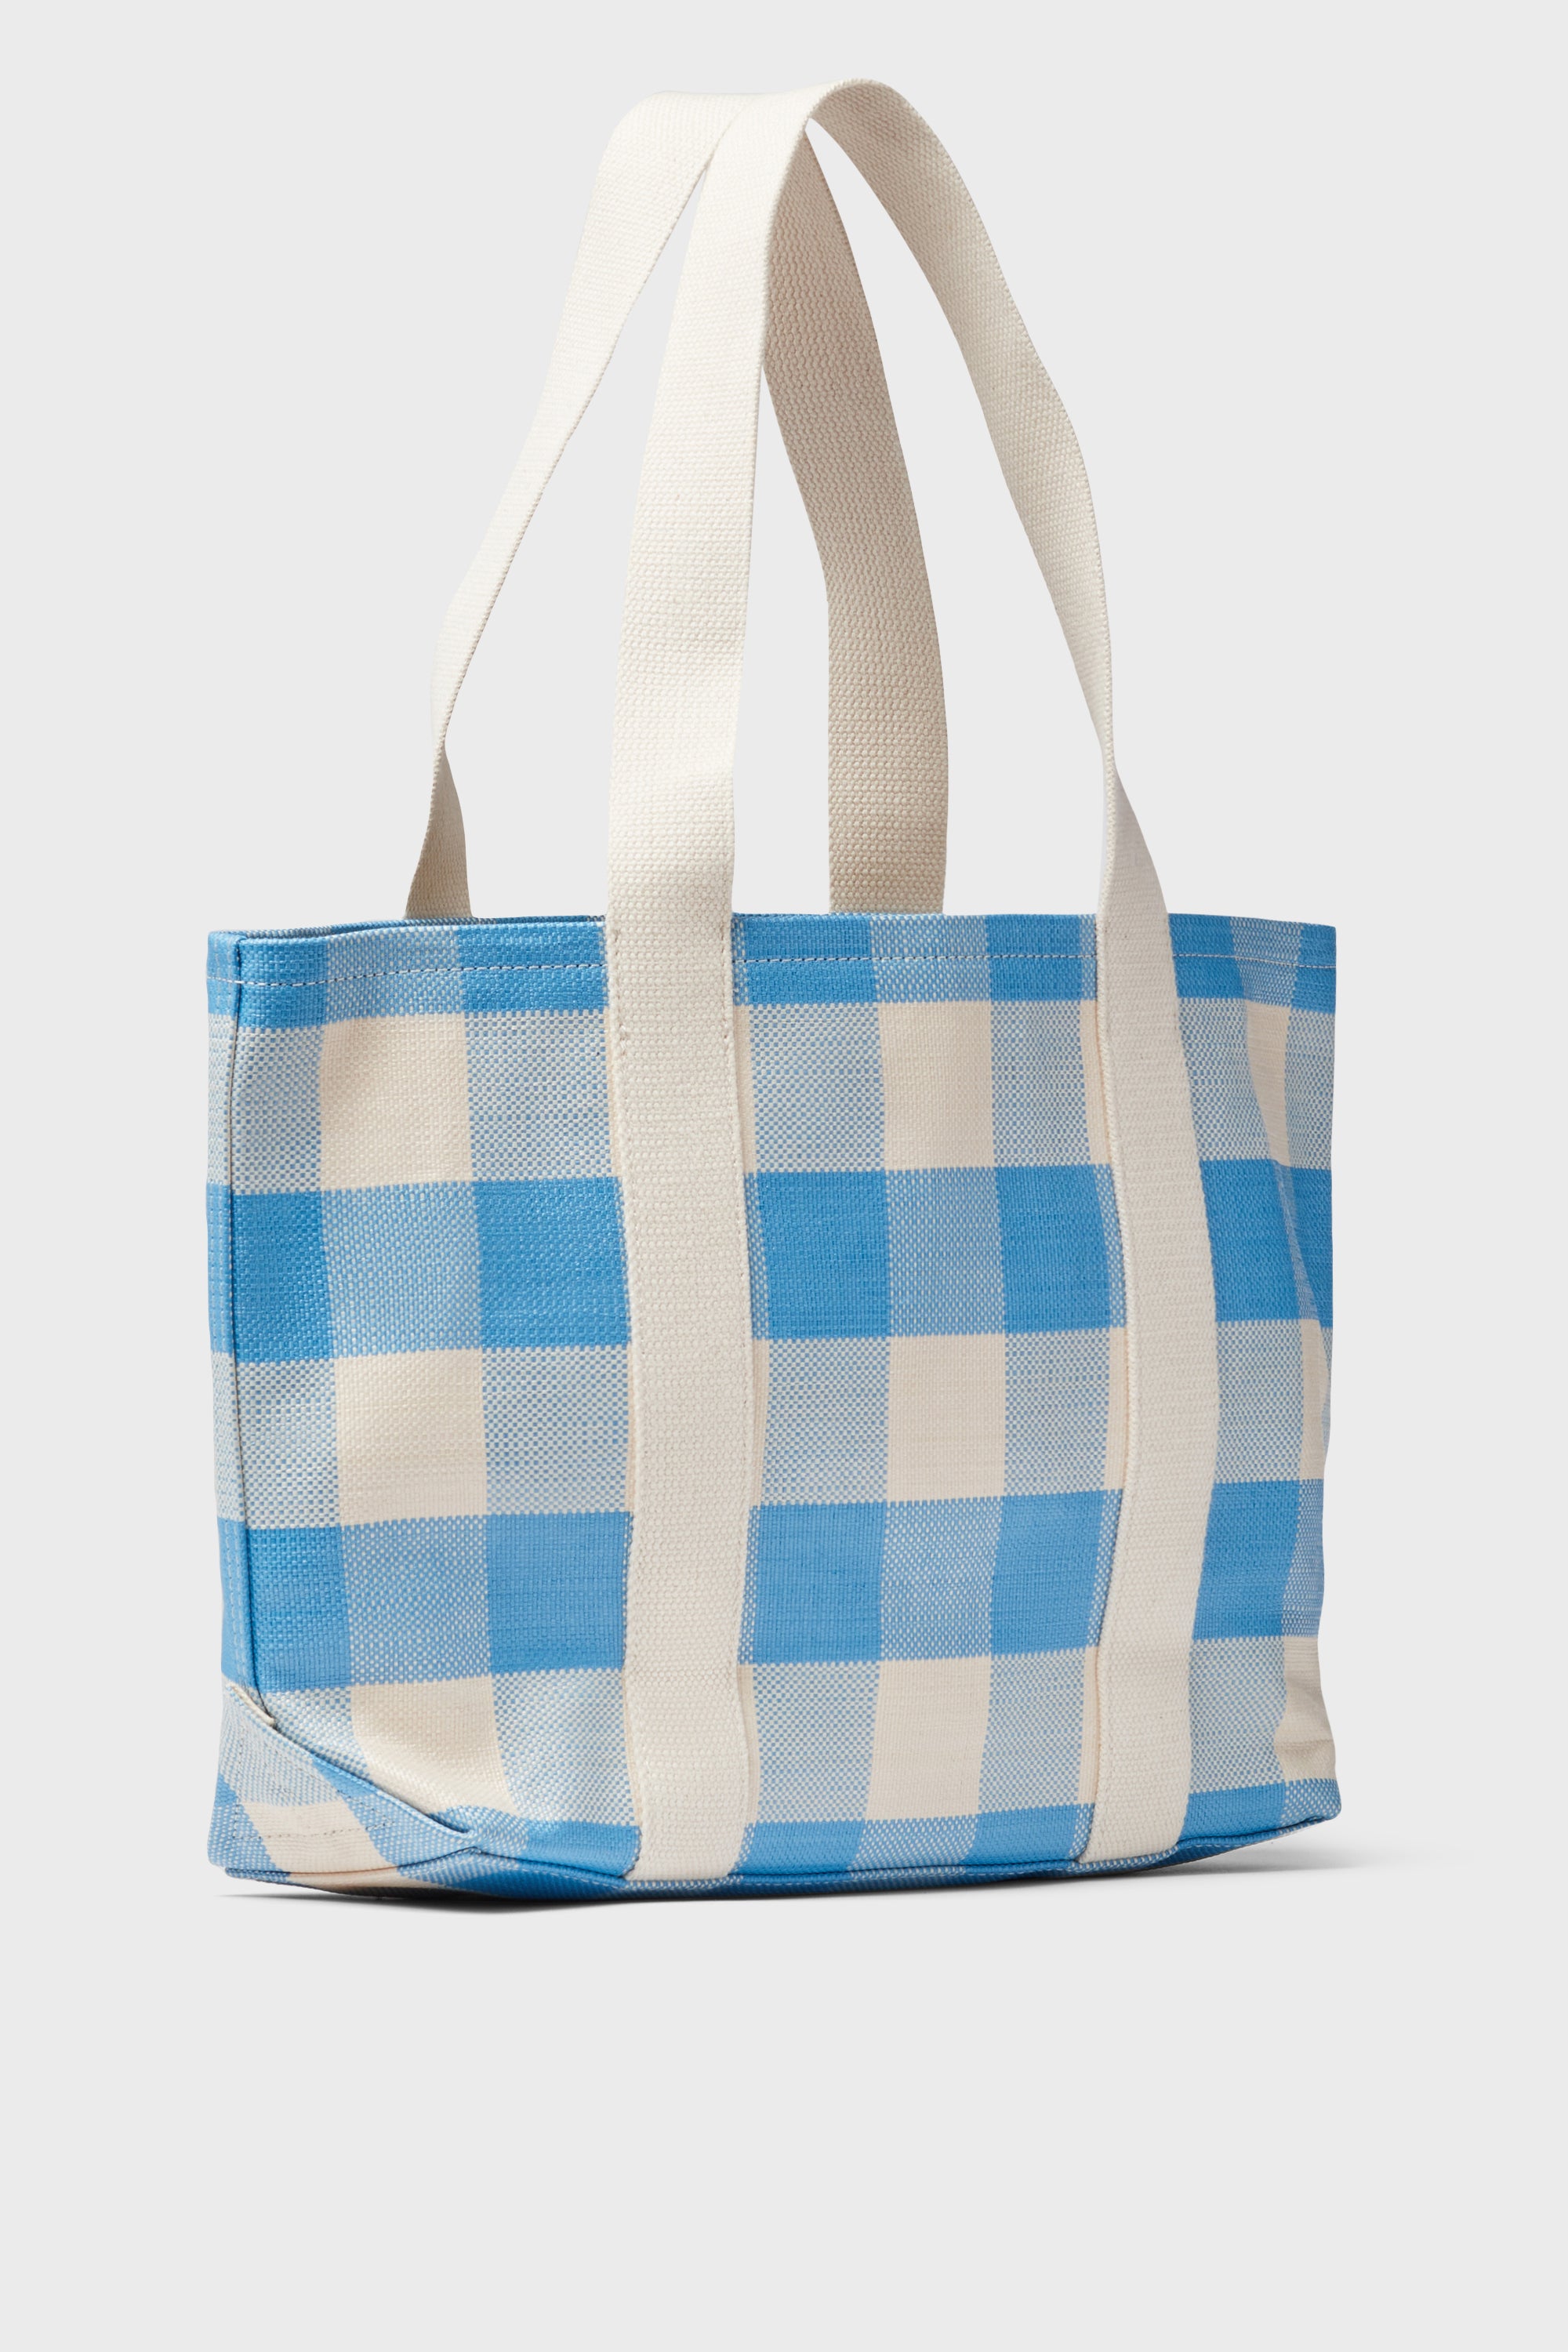 Navy Plaid Simple Tote by Clare V. for $113